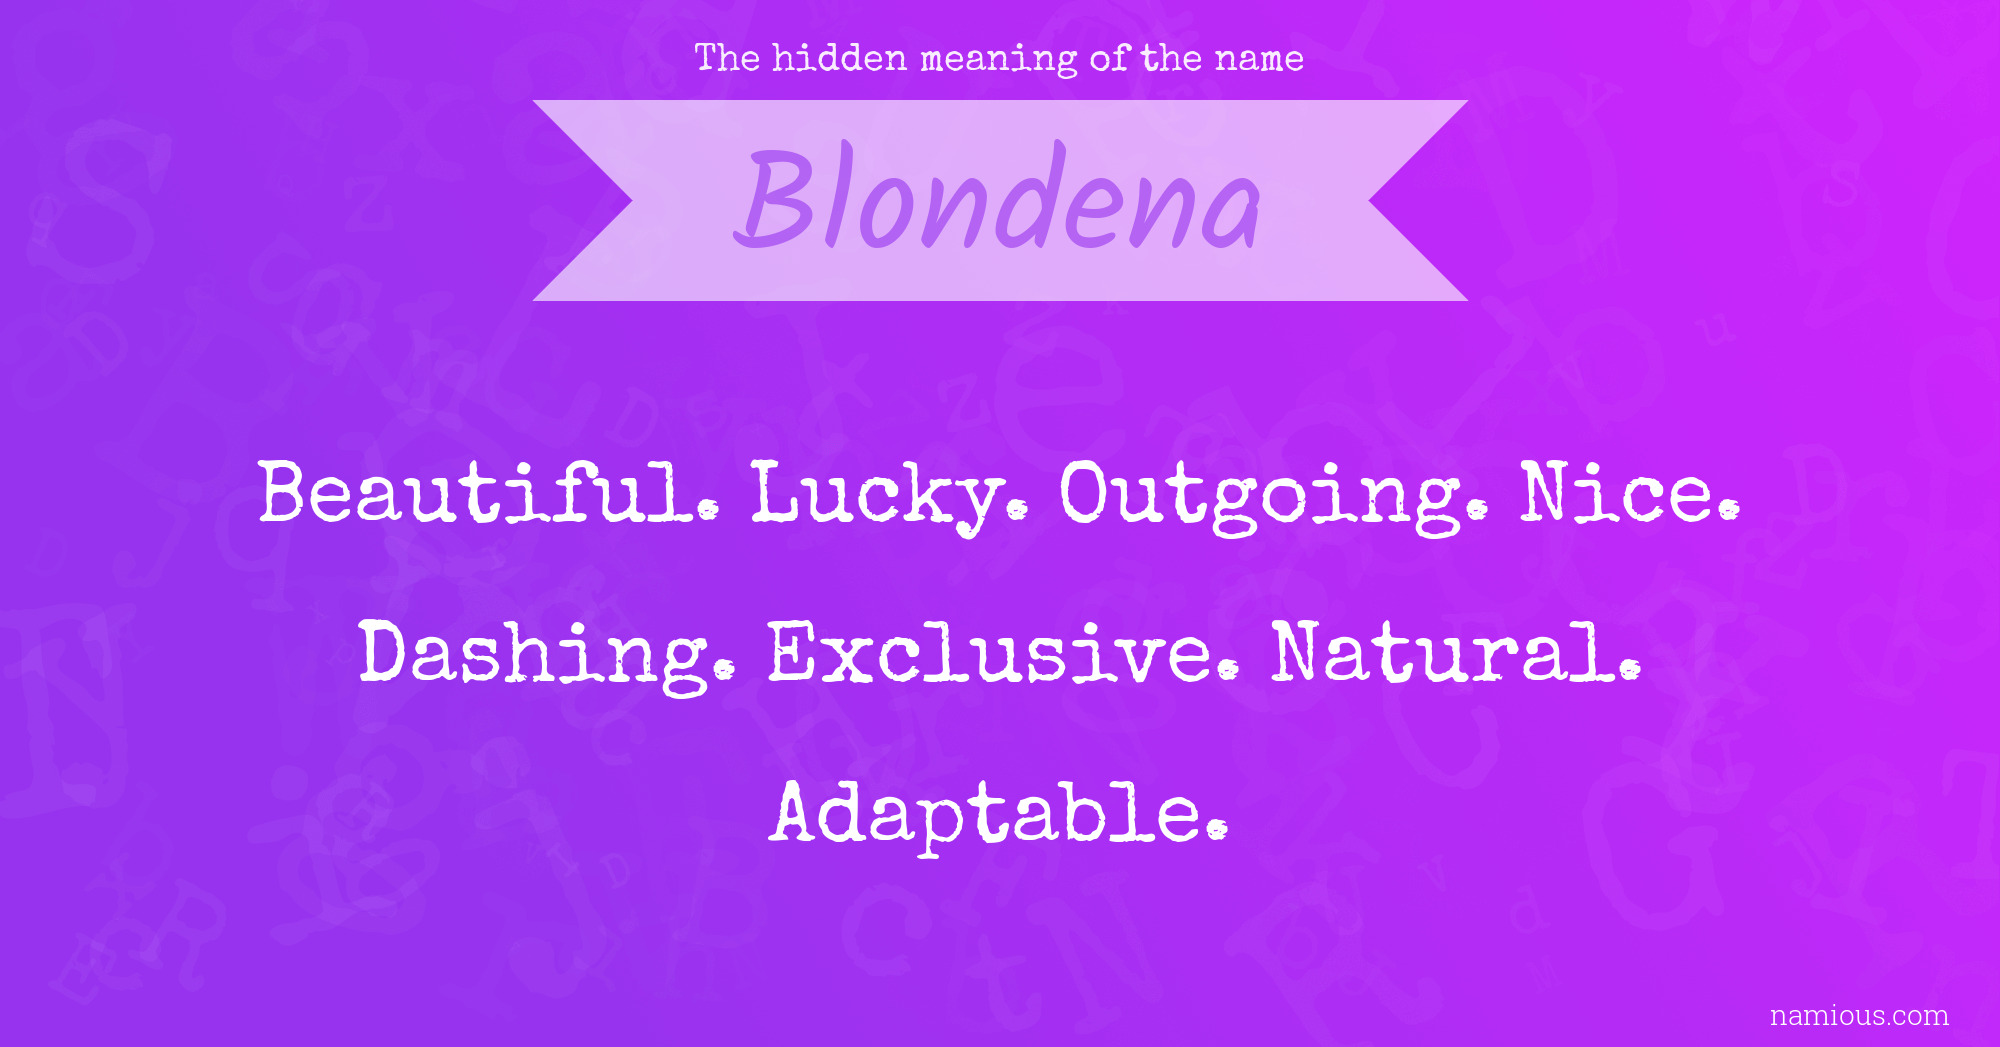 The hidden meaning of the name Blondena